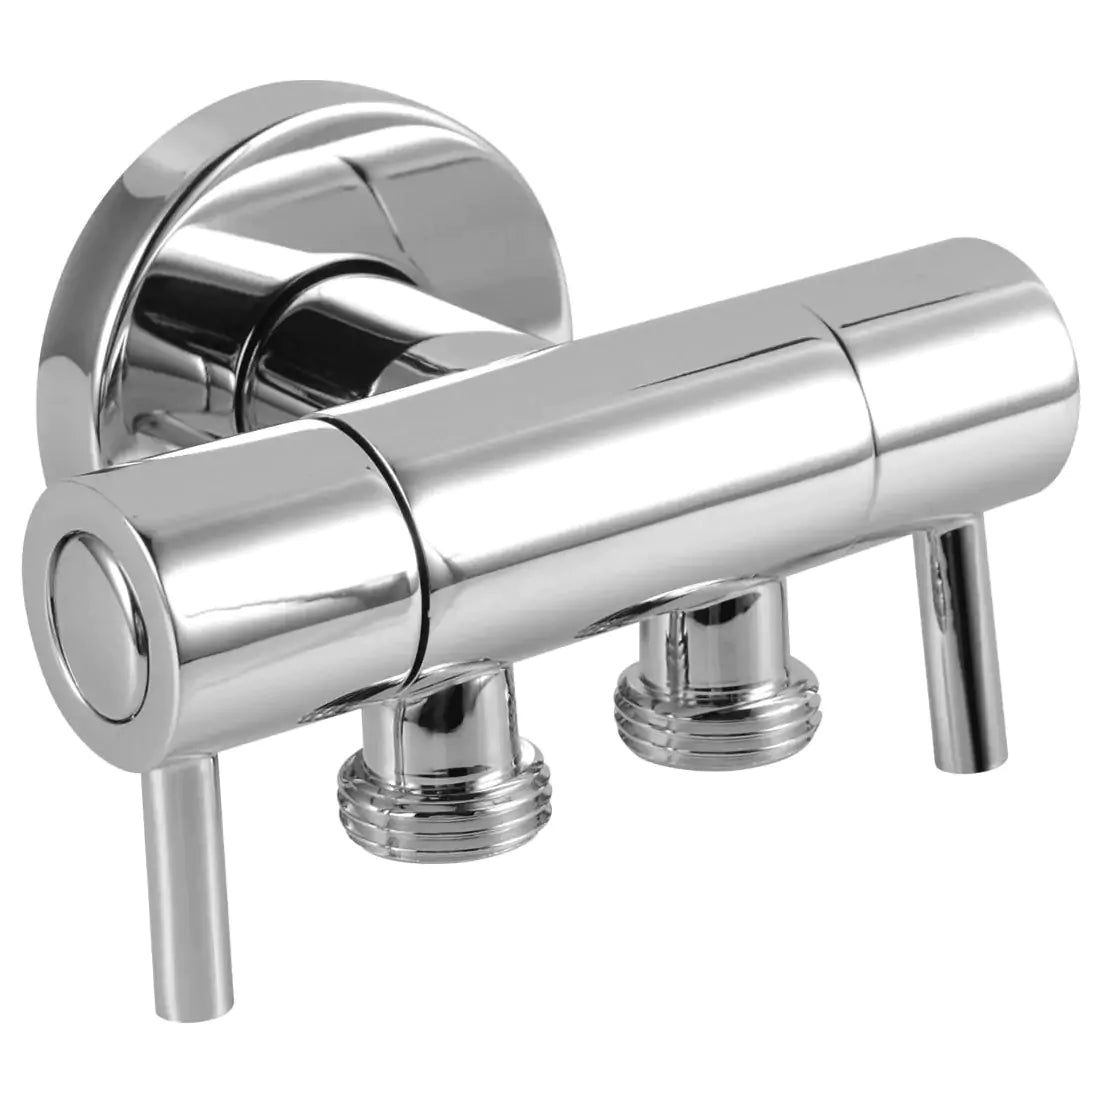 Toilet Bidet Spray Diverter with Solid Brass Construction-CH003.ST-Chrome Plated